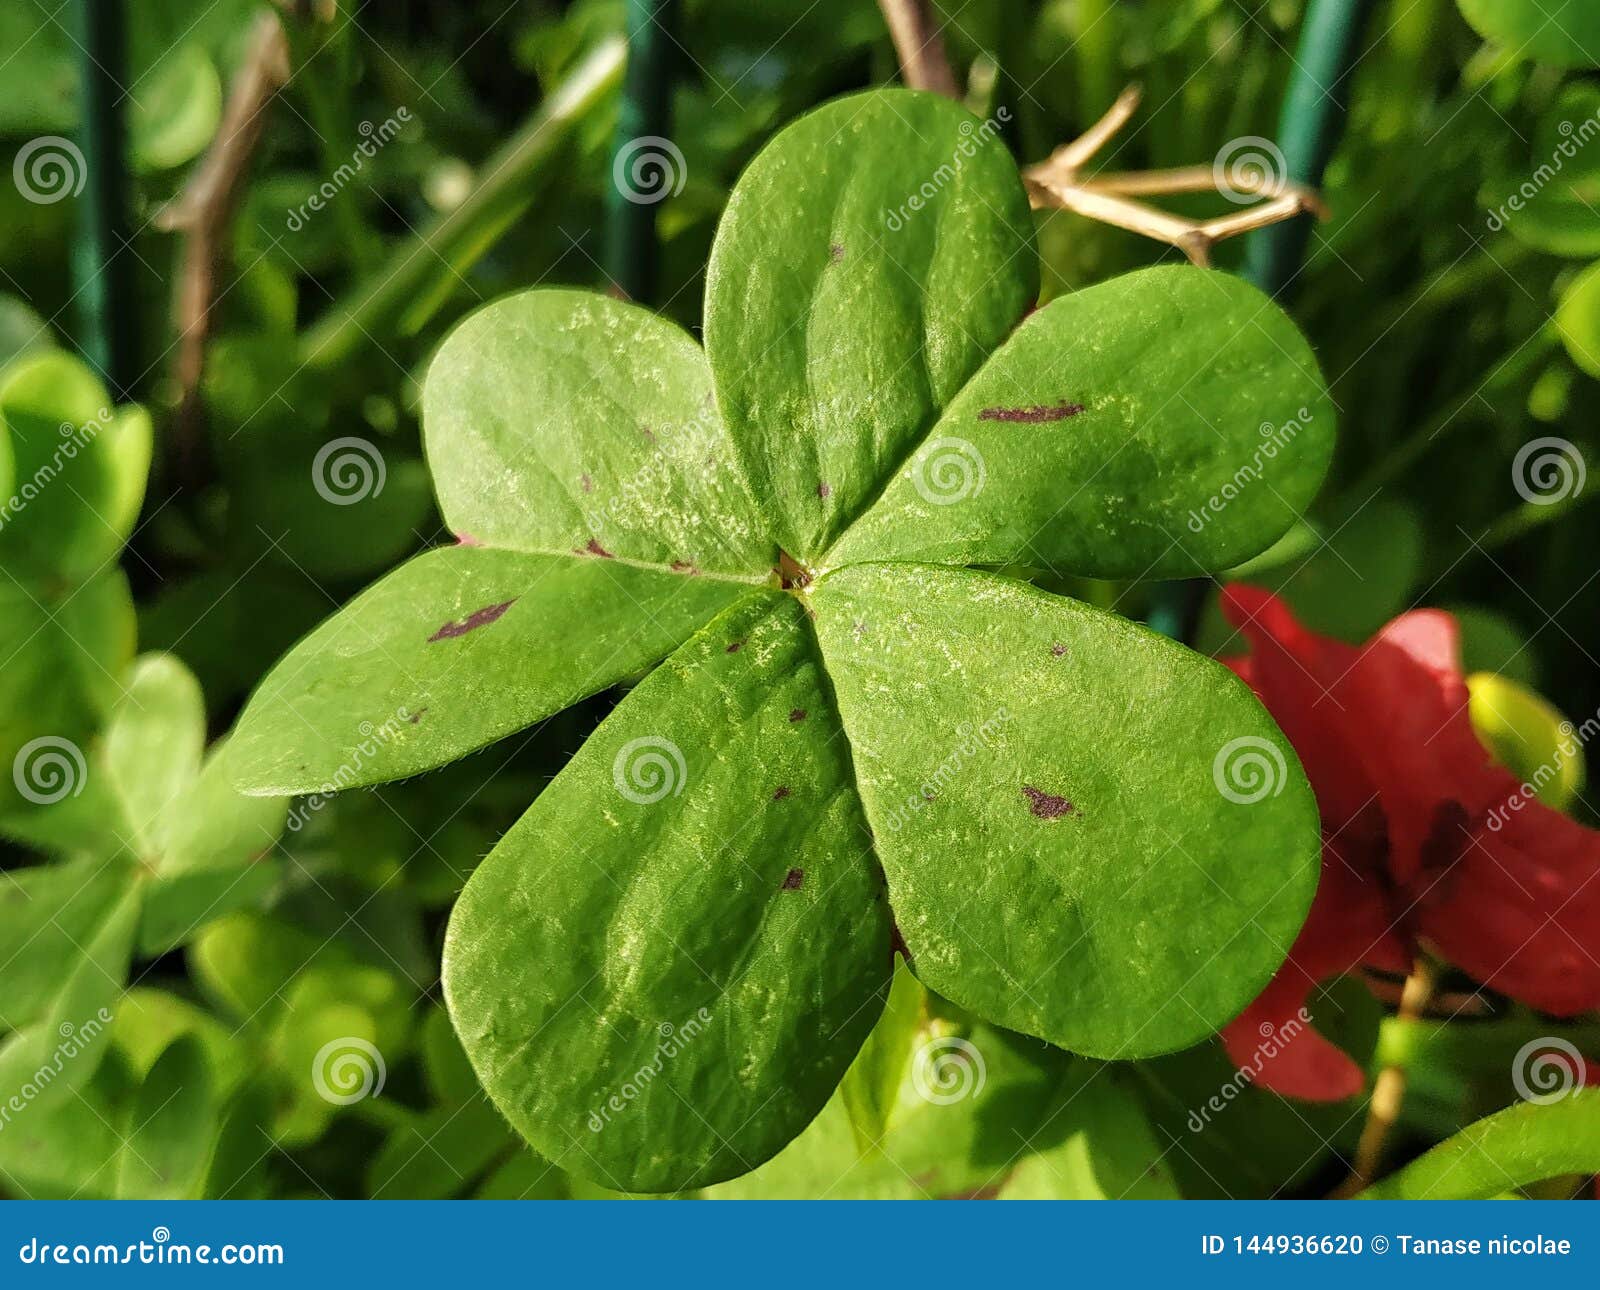 leaf of green clover a day with sun in spain.